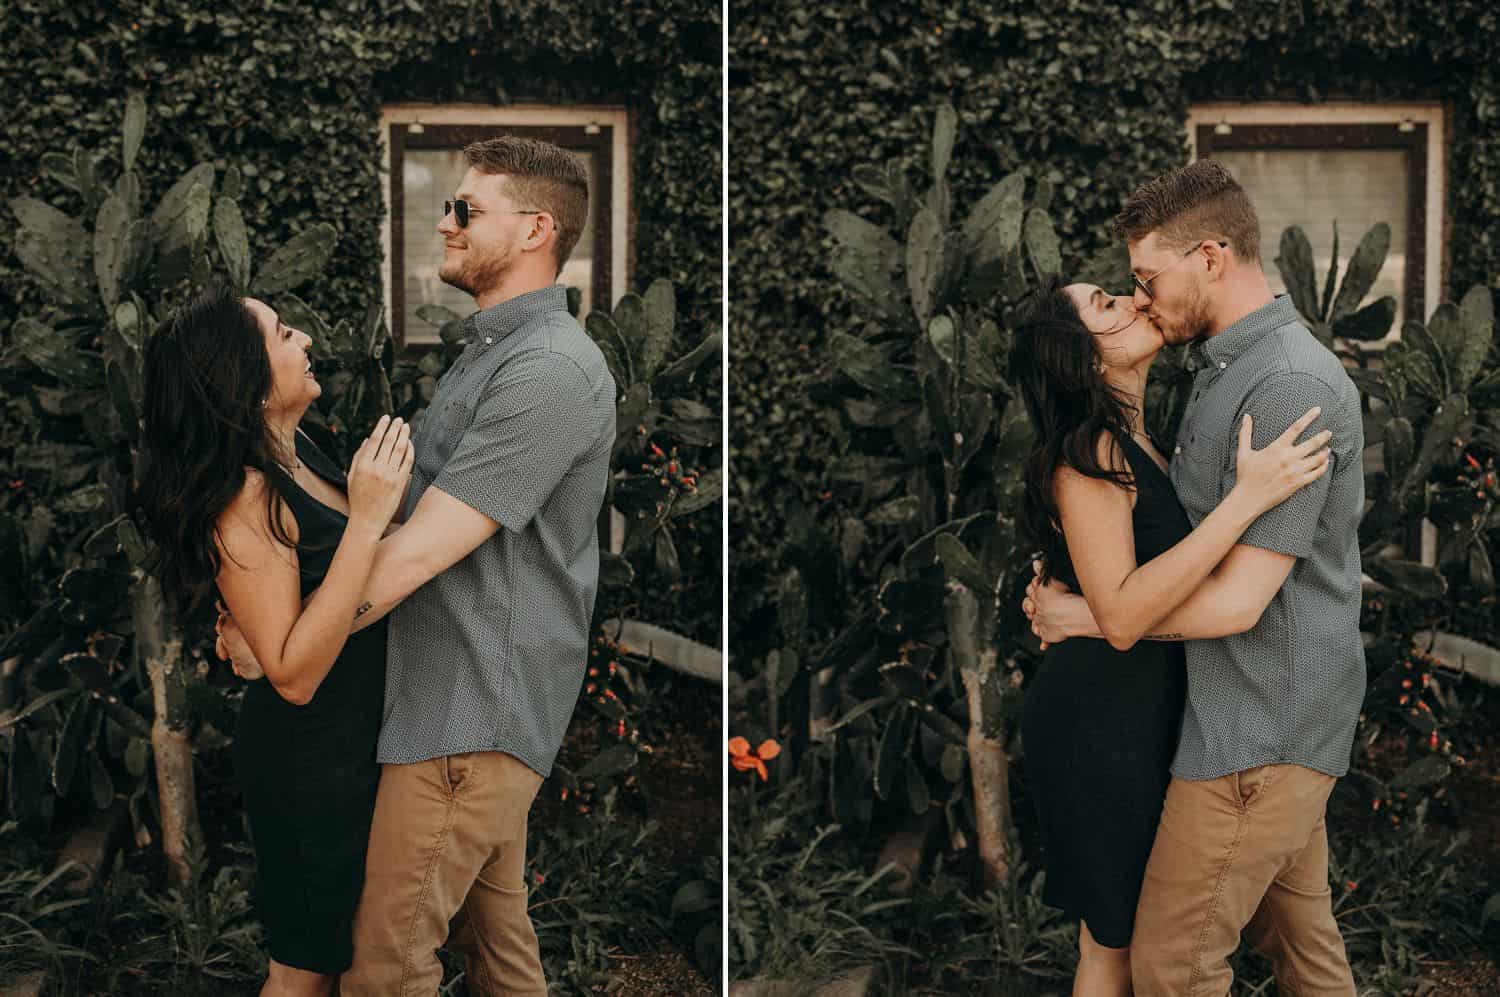 A couple embraces in the shade of a beautiful old building